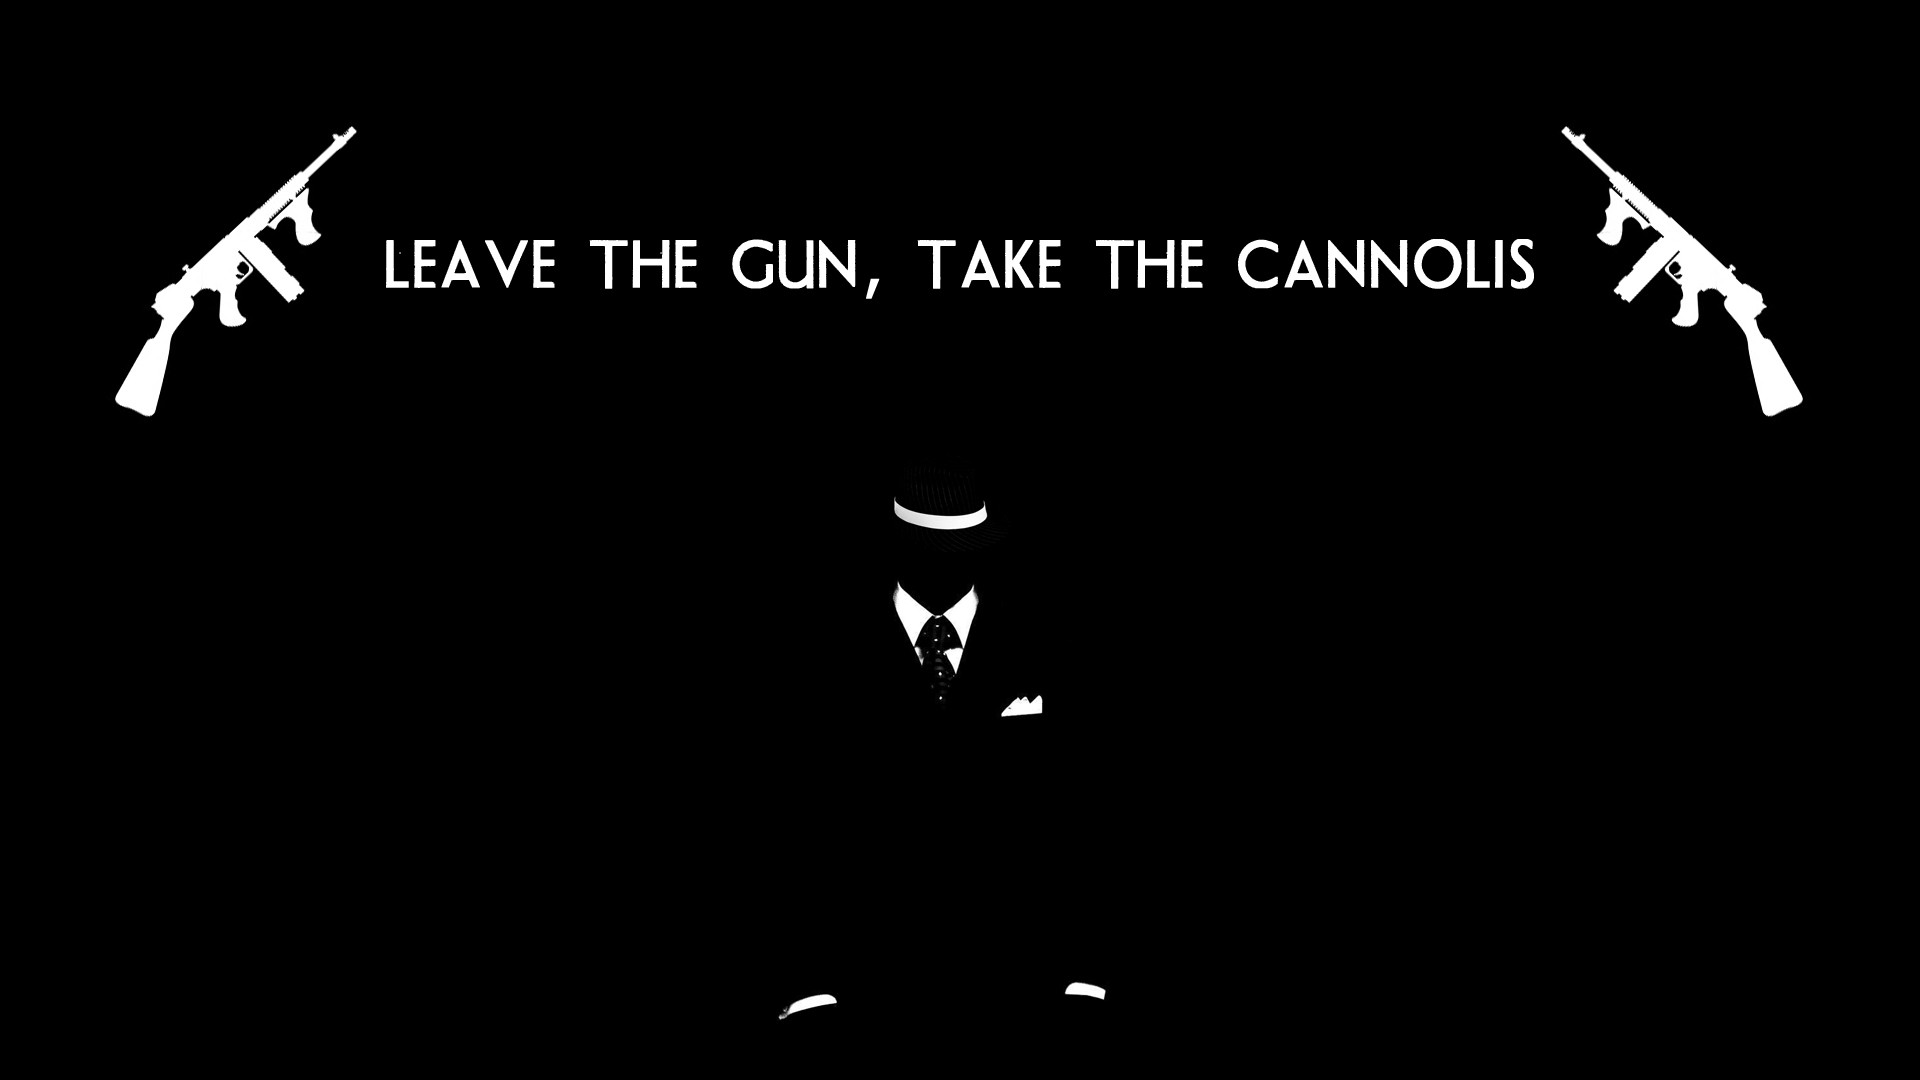 the, Godfather, Bw, Black, Gun, Cannolis, Movies, Mafia, Weapons, Text, Quotes, Statements, Humor Wallpaper